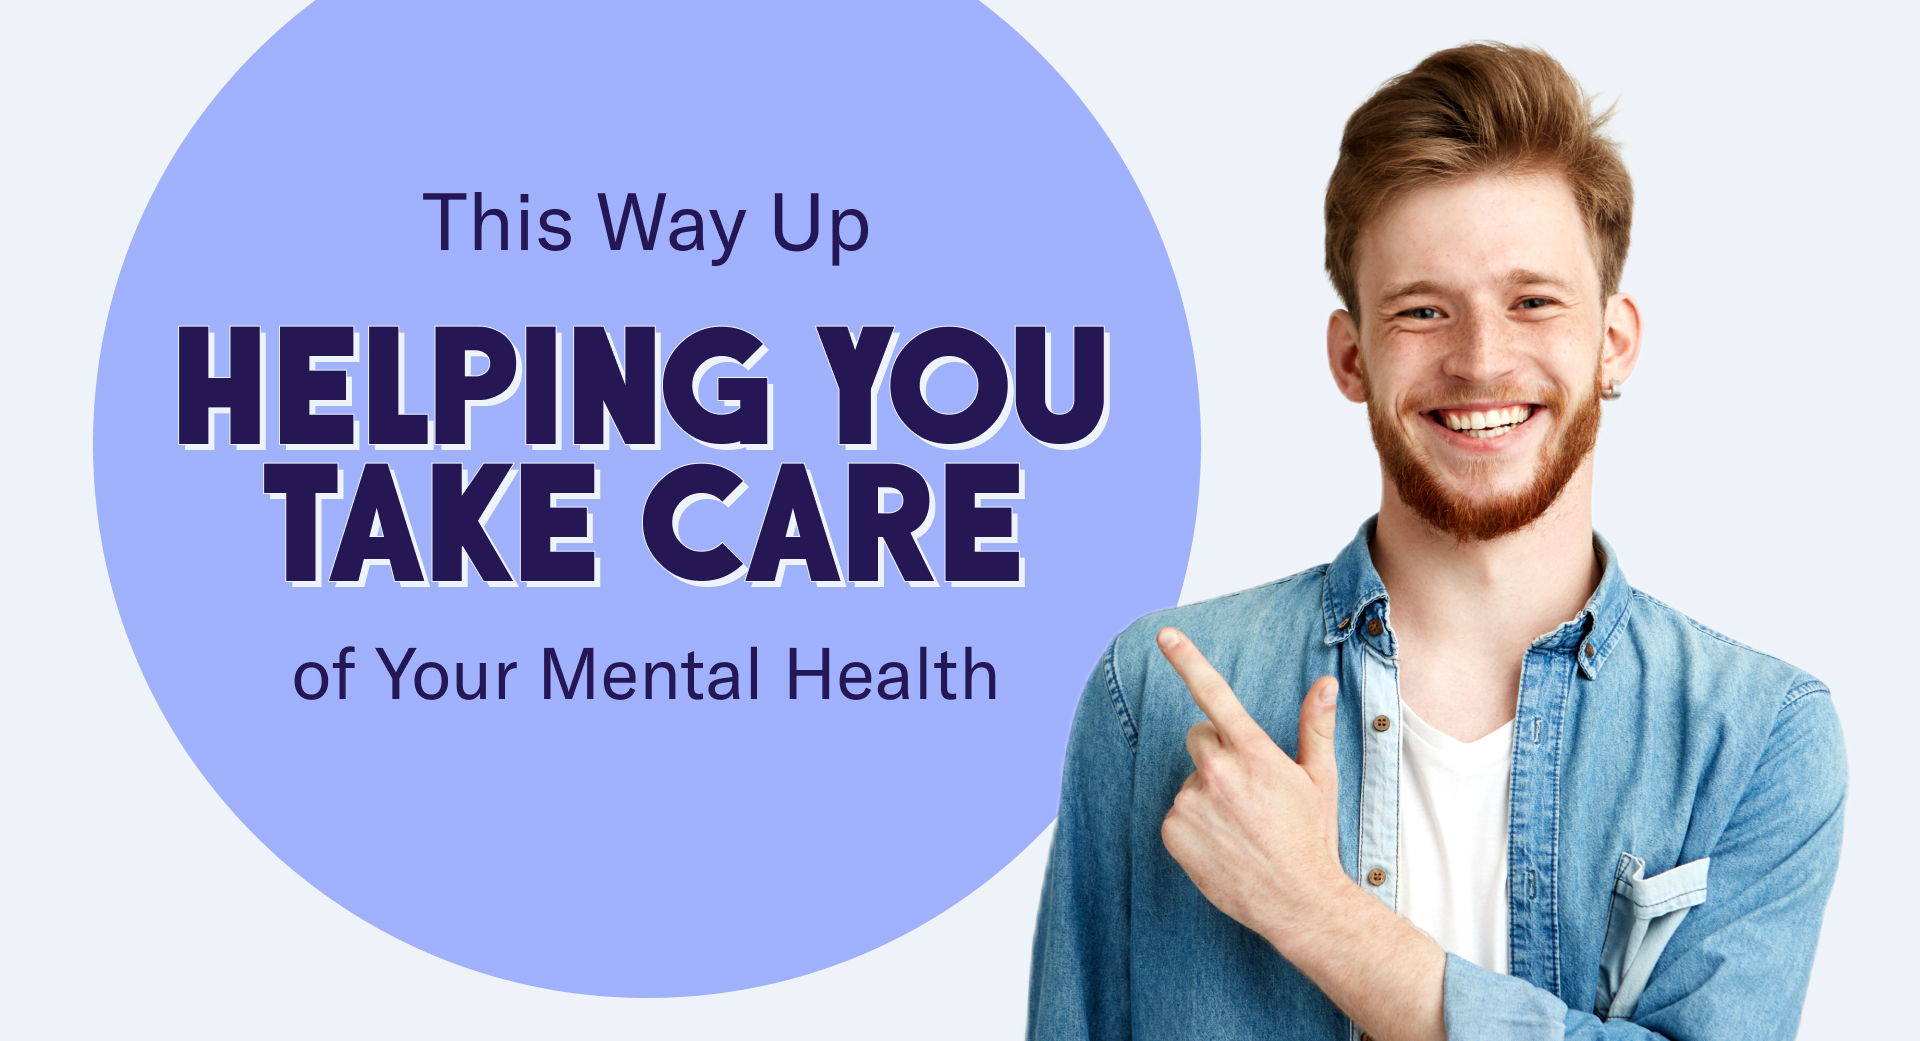 THIS WAY UP Helping You Take Care of Your Mental Health